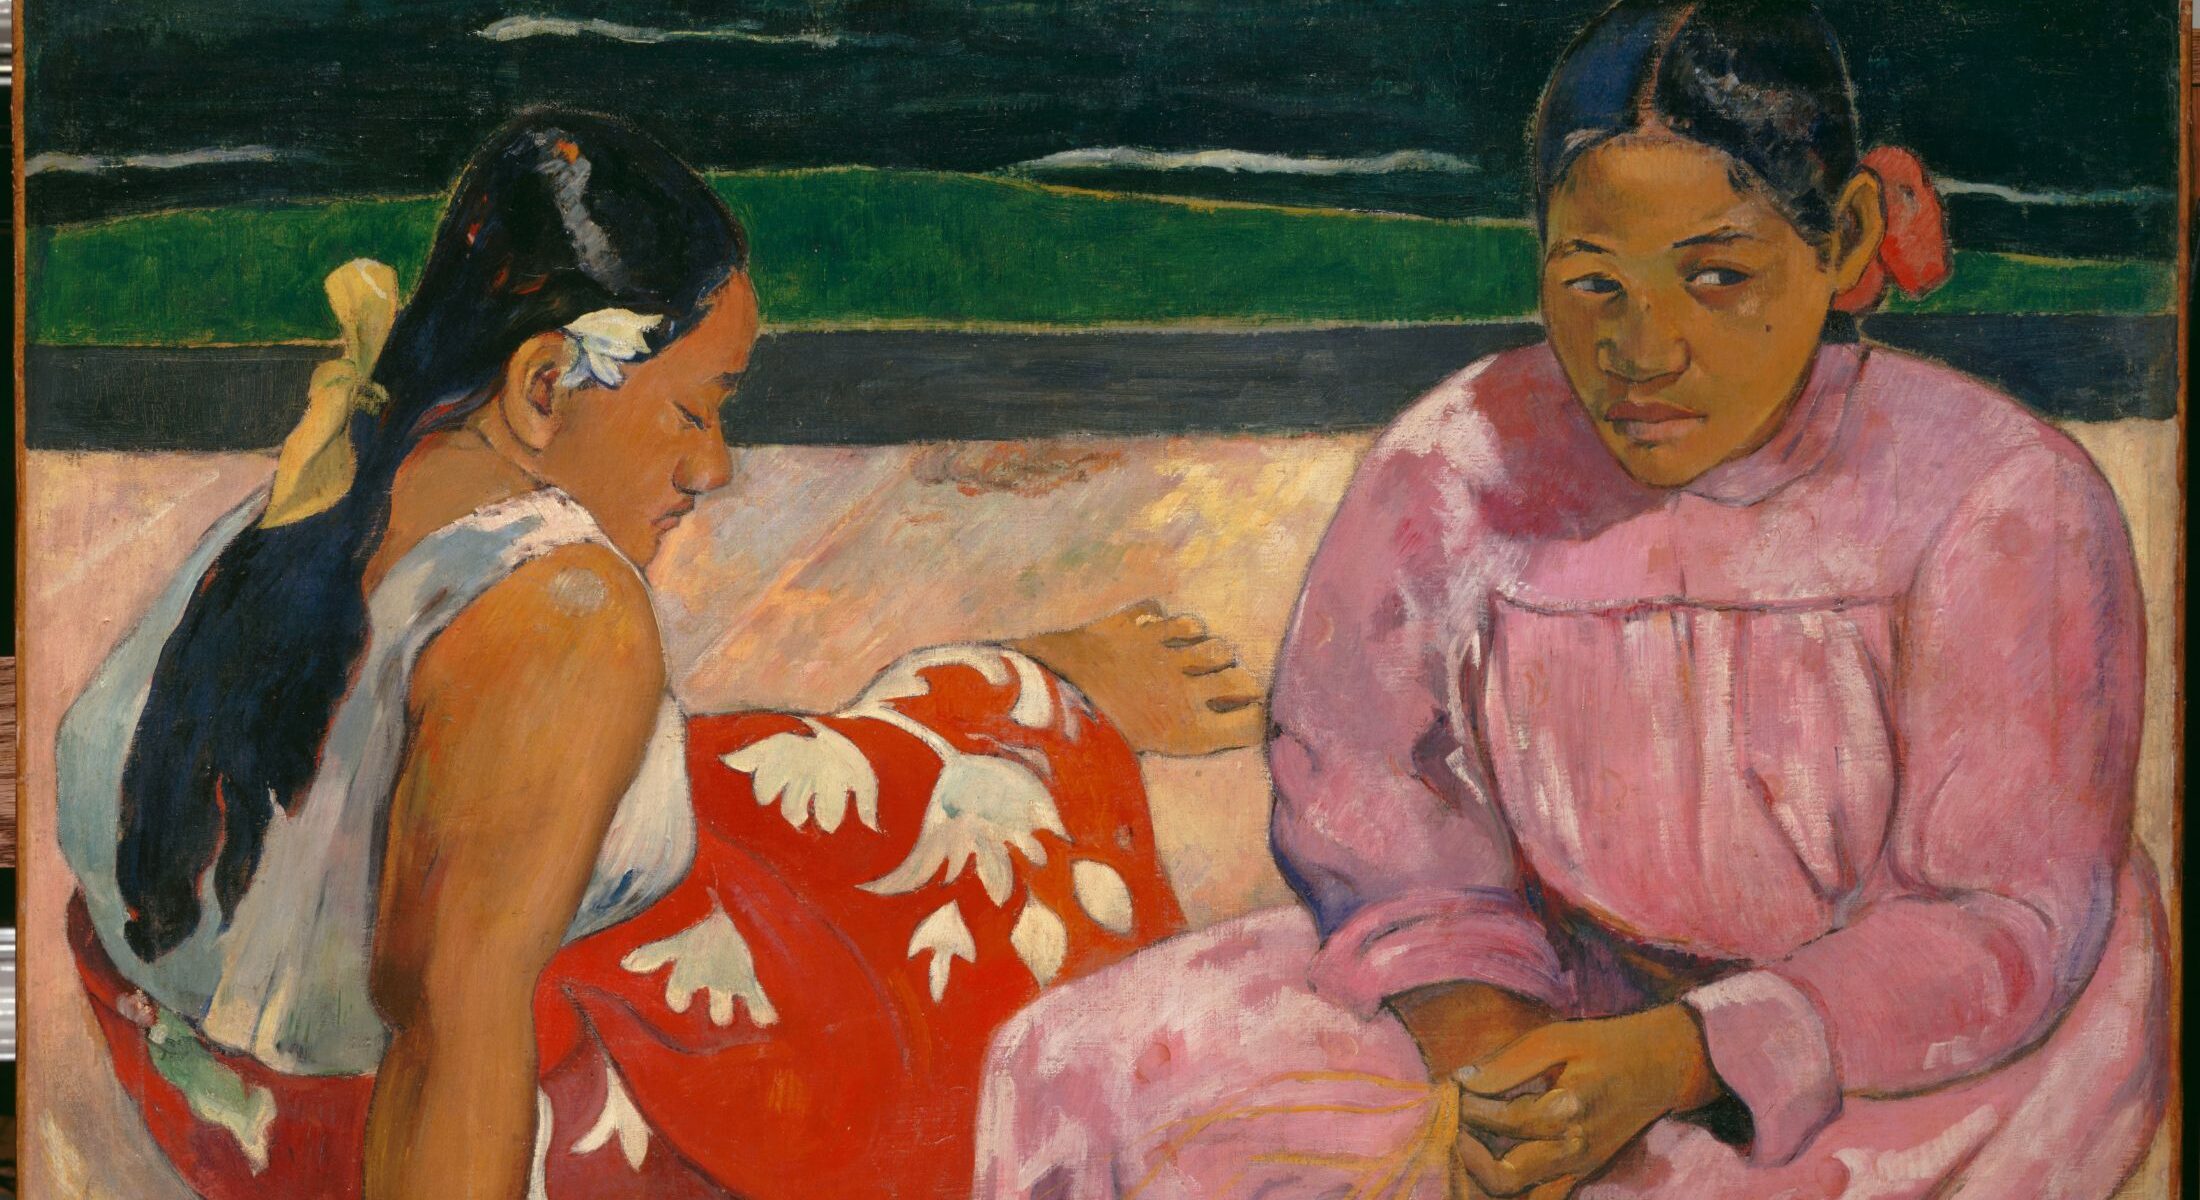 Exhibition realised with gratitude for exceptional loans from the Musée d'Orsay.